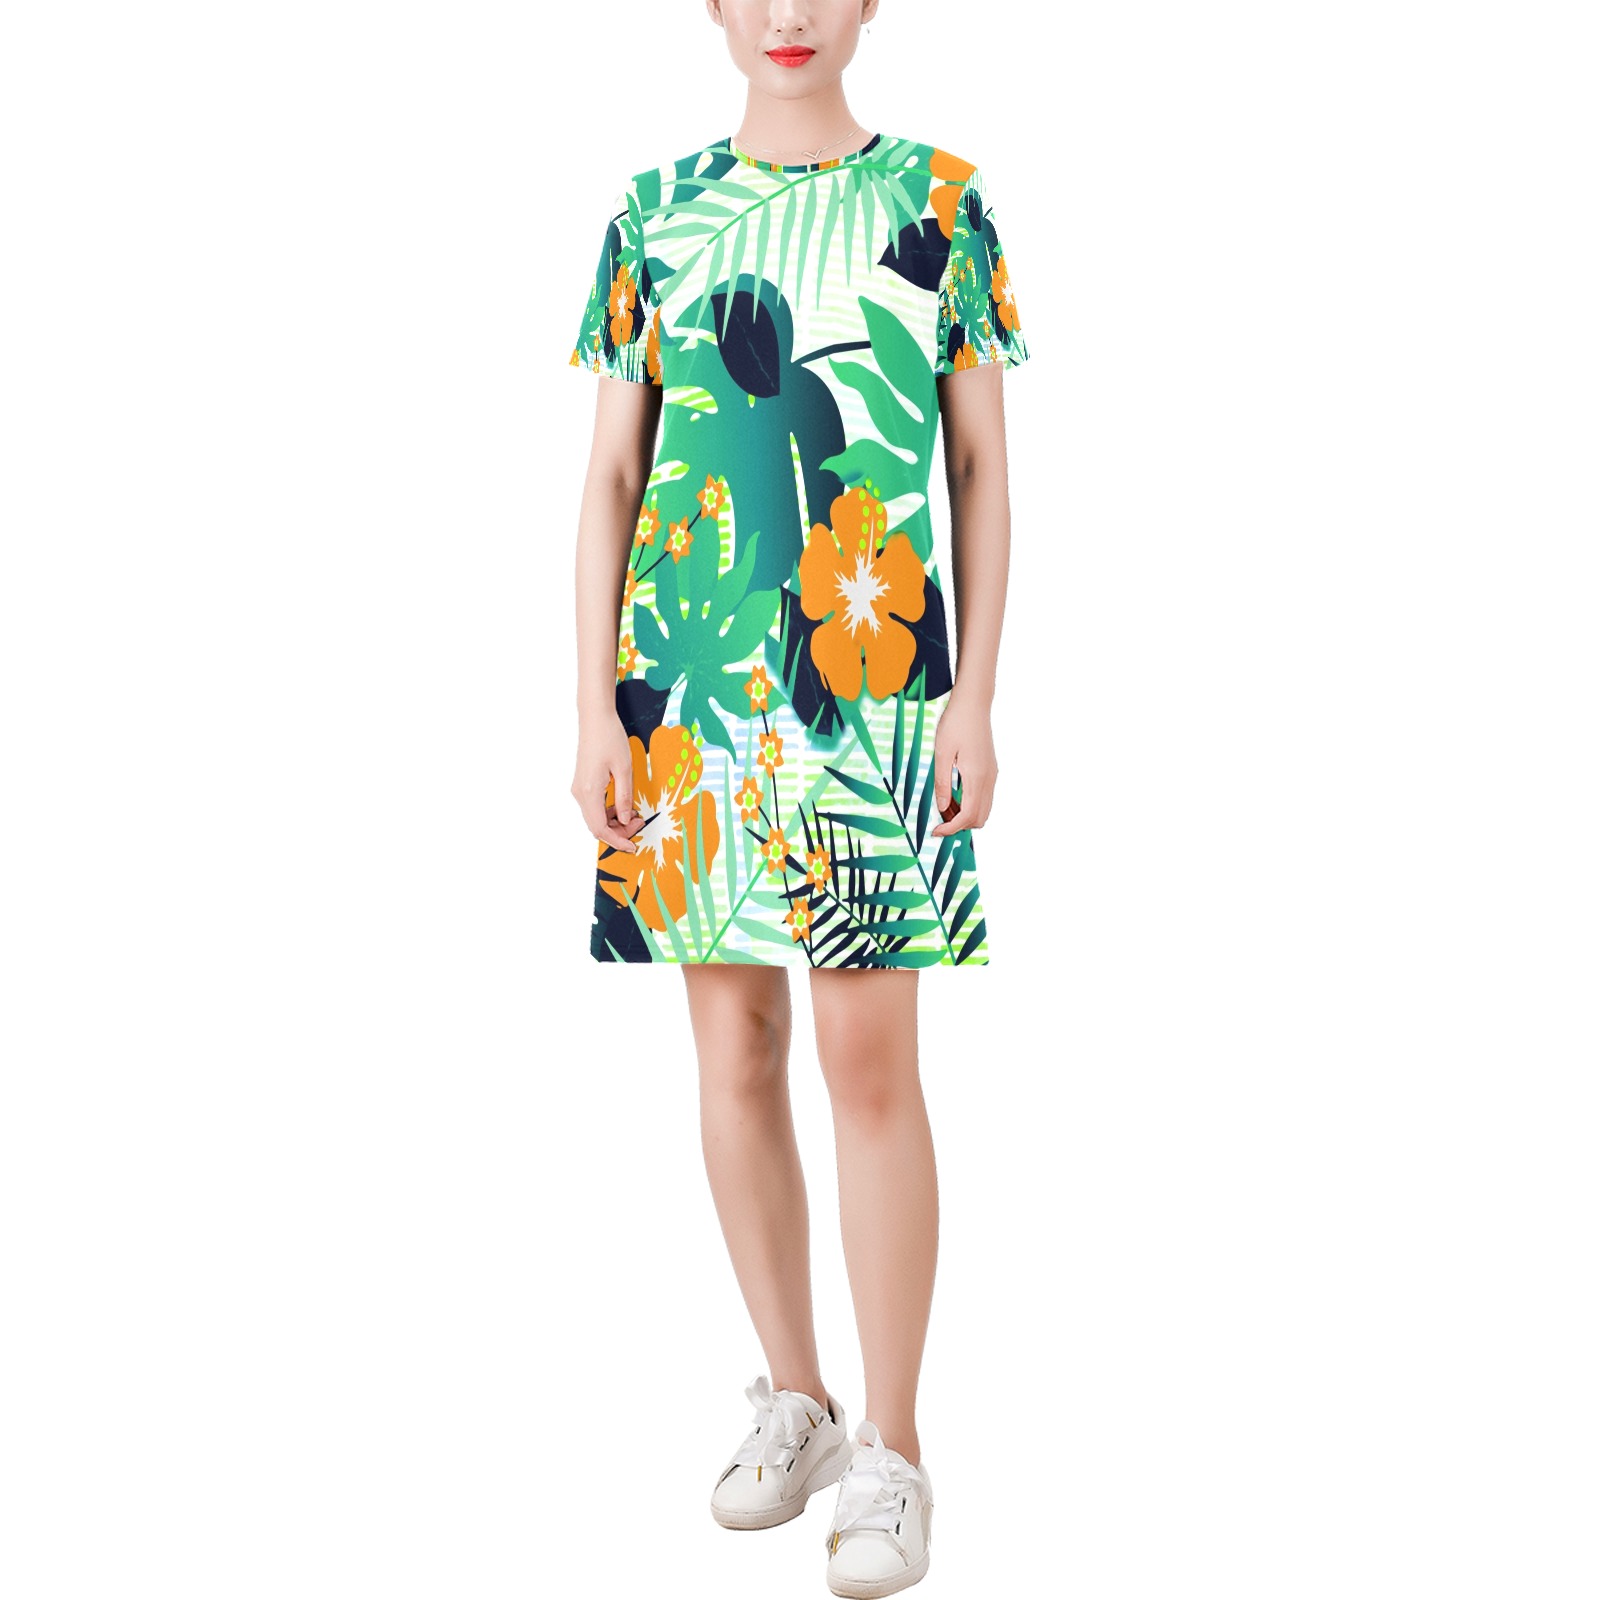 GROOVY FUNK THING FLORAL Short-Sleeve Round Neck A-Line Dress (Model D47)